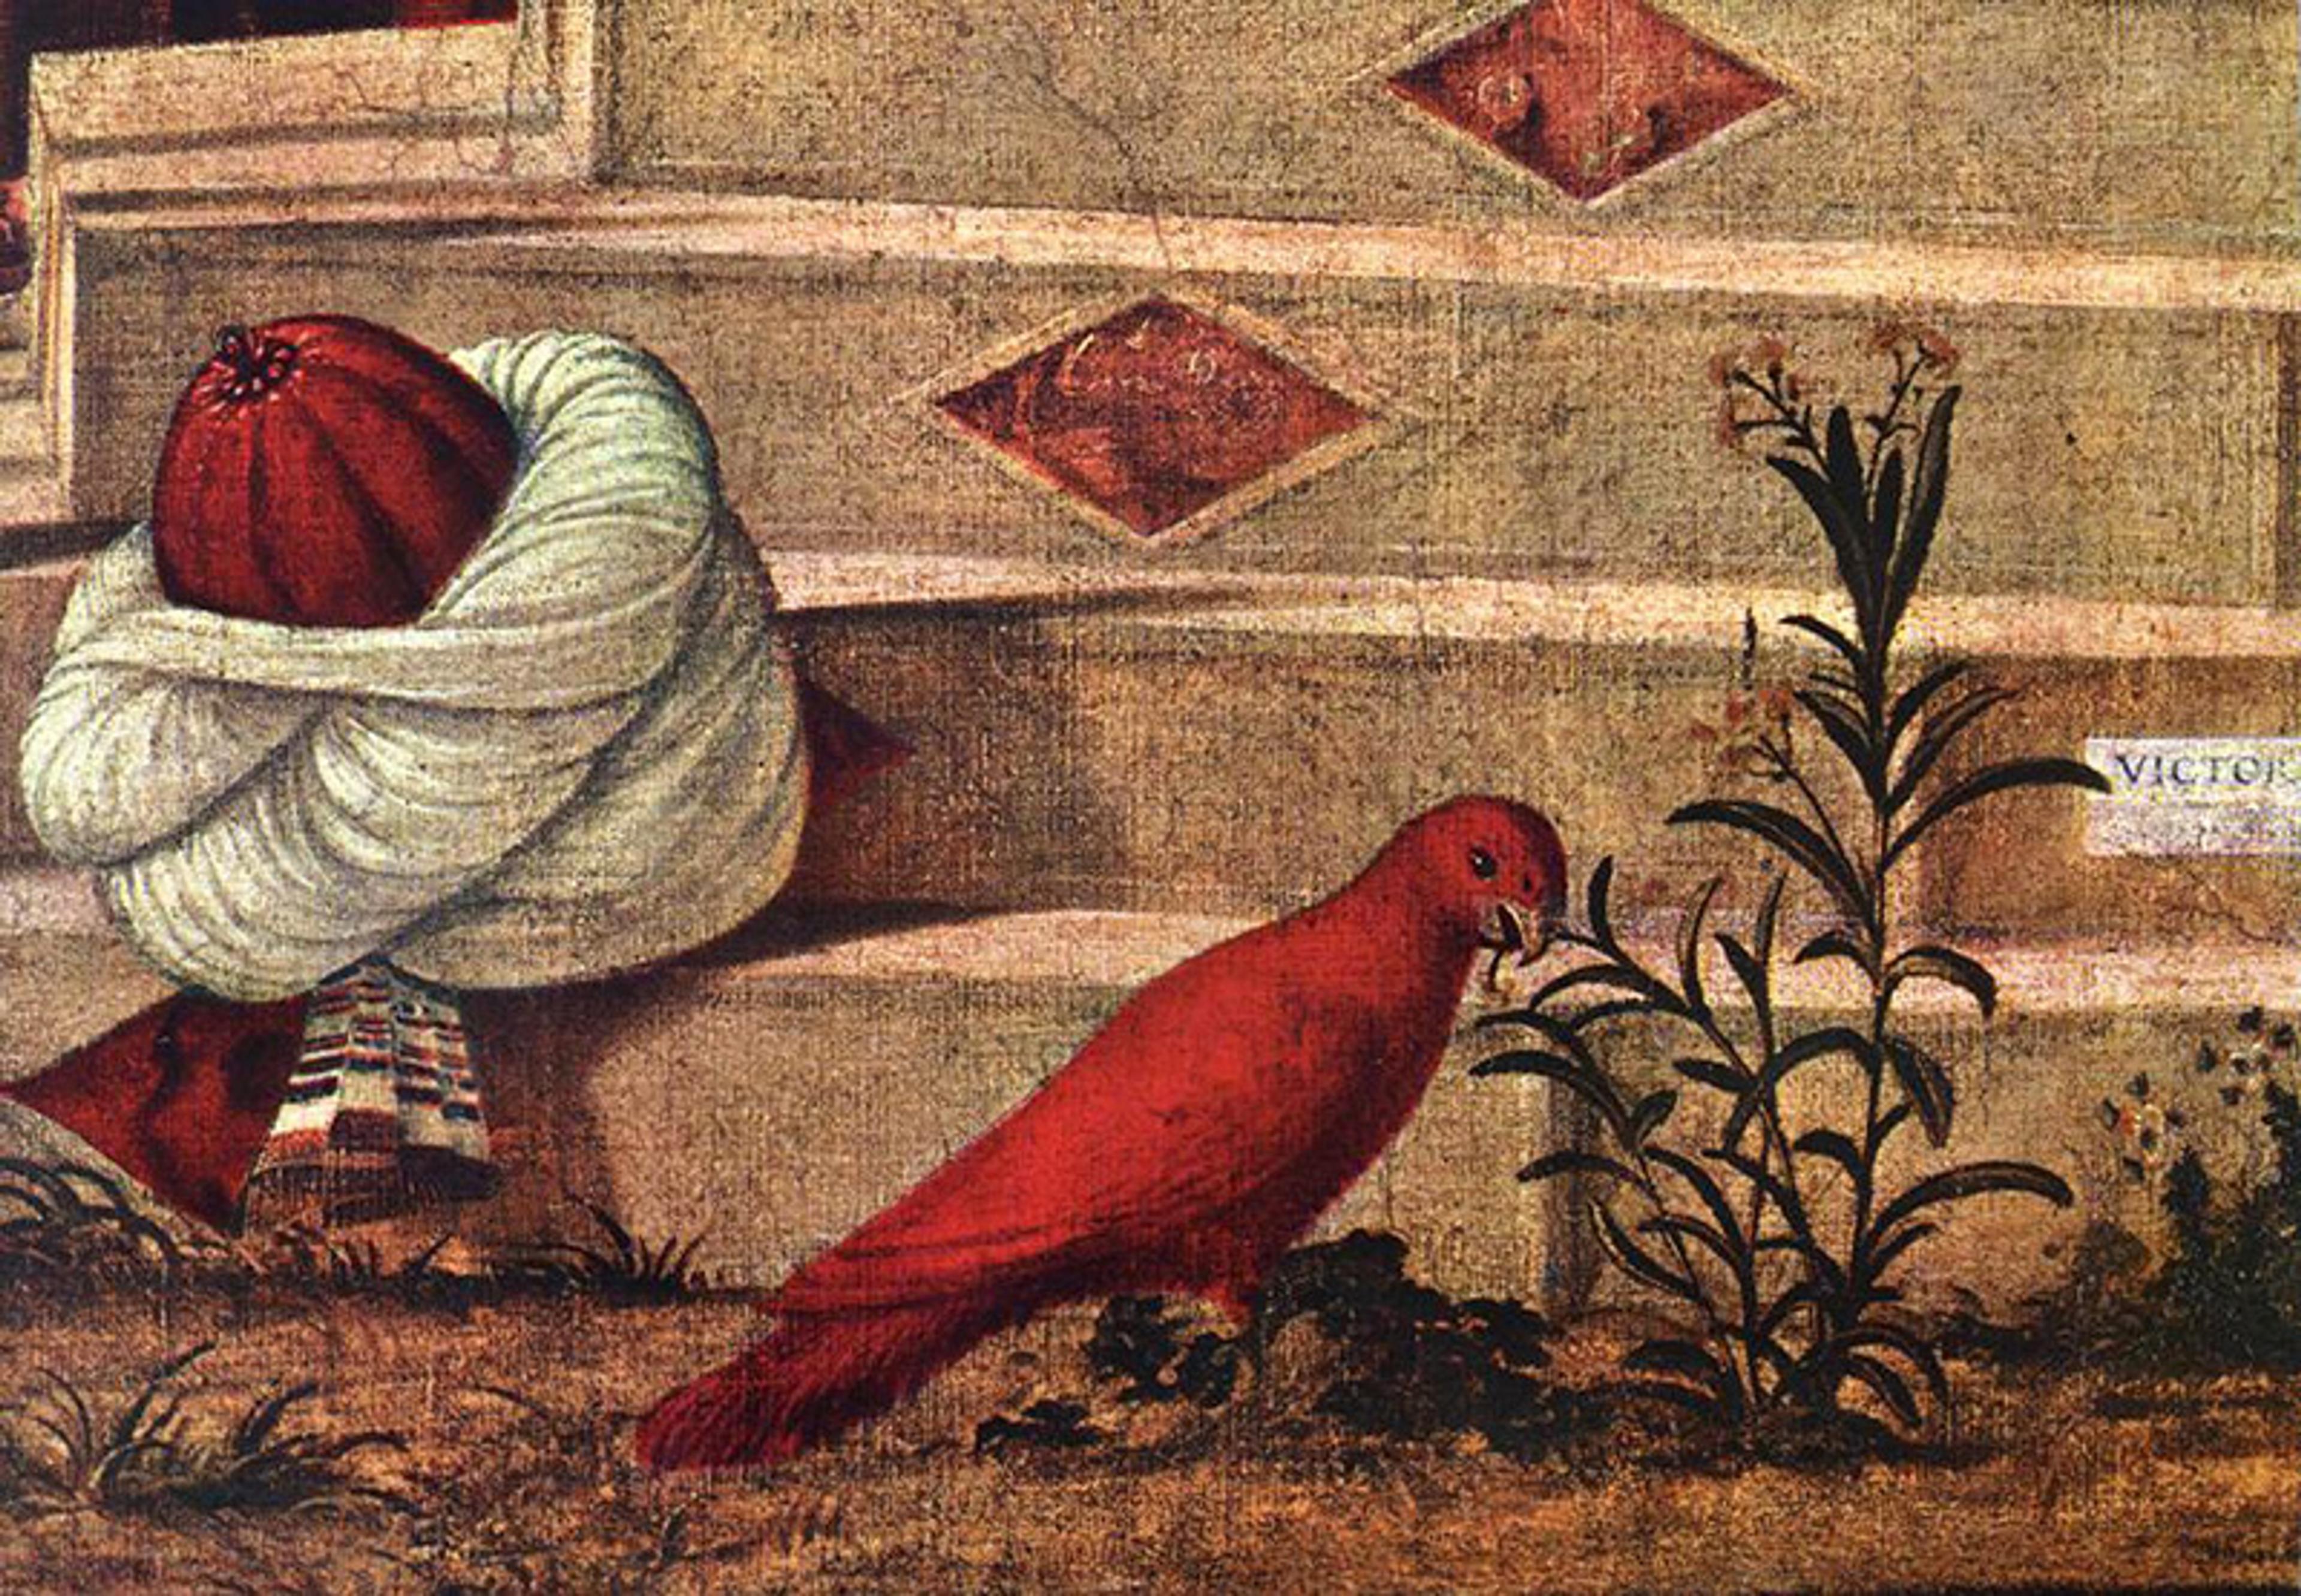 Noticing the birds in great paintings taught me to see the world